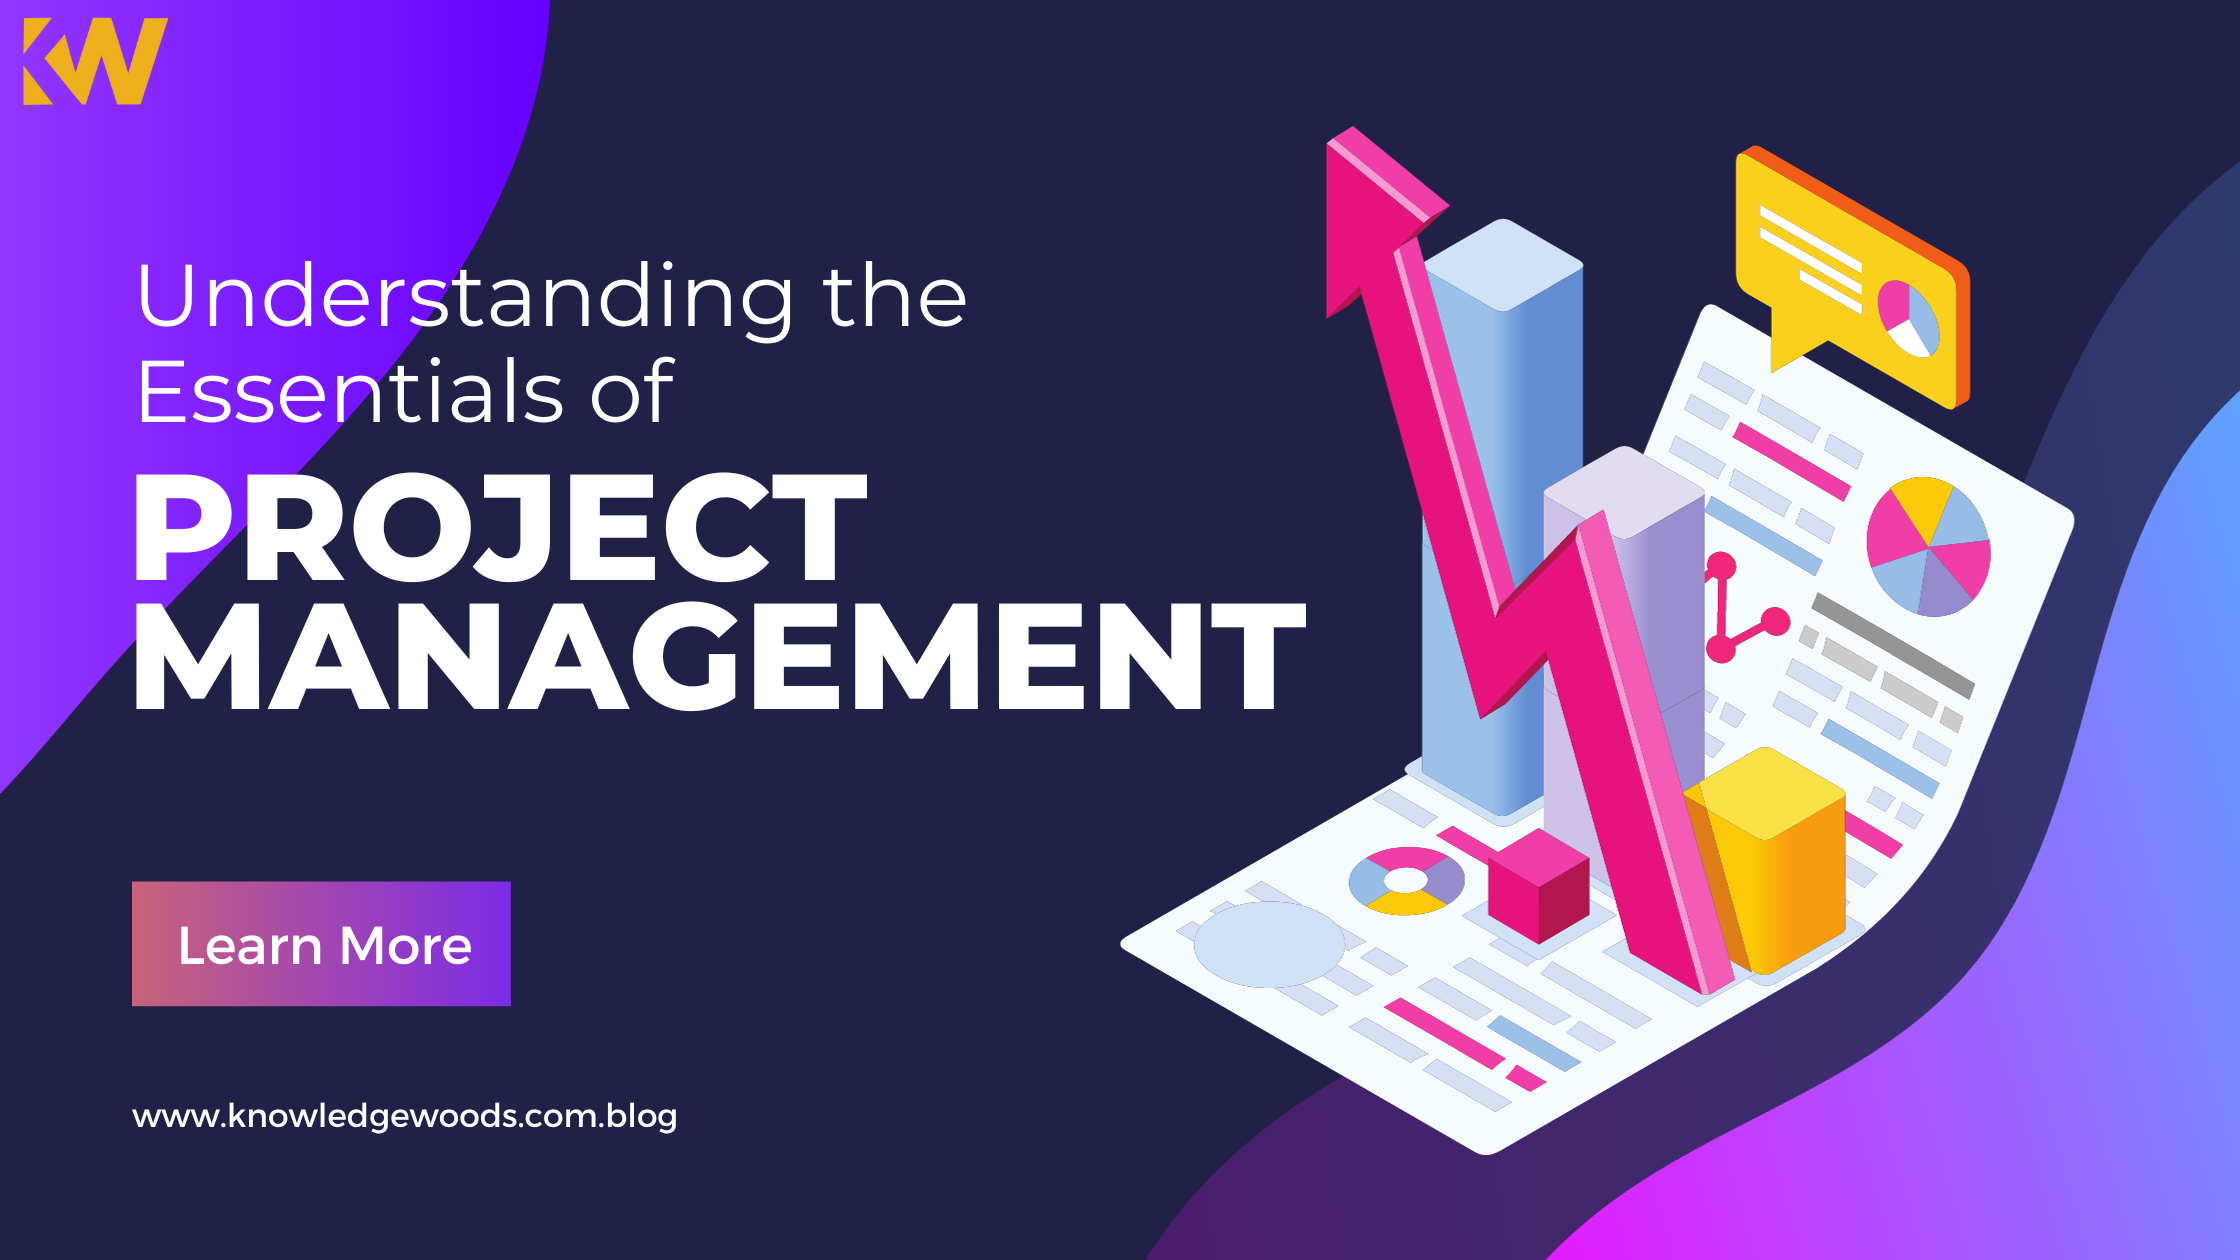 Project Management Essentials: Tasks & Actions Involved